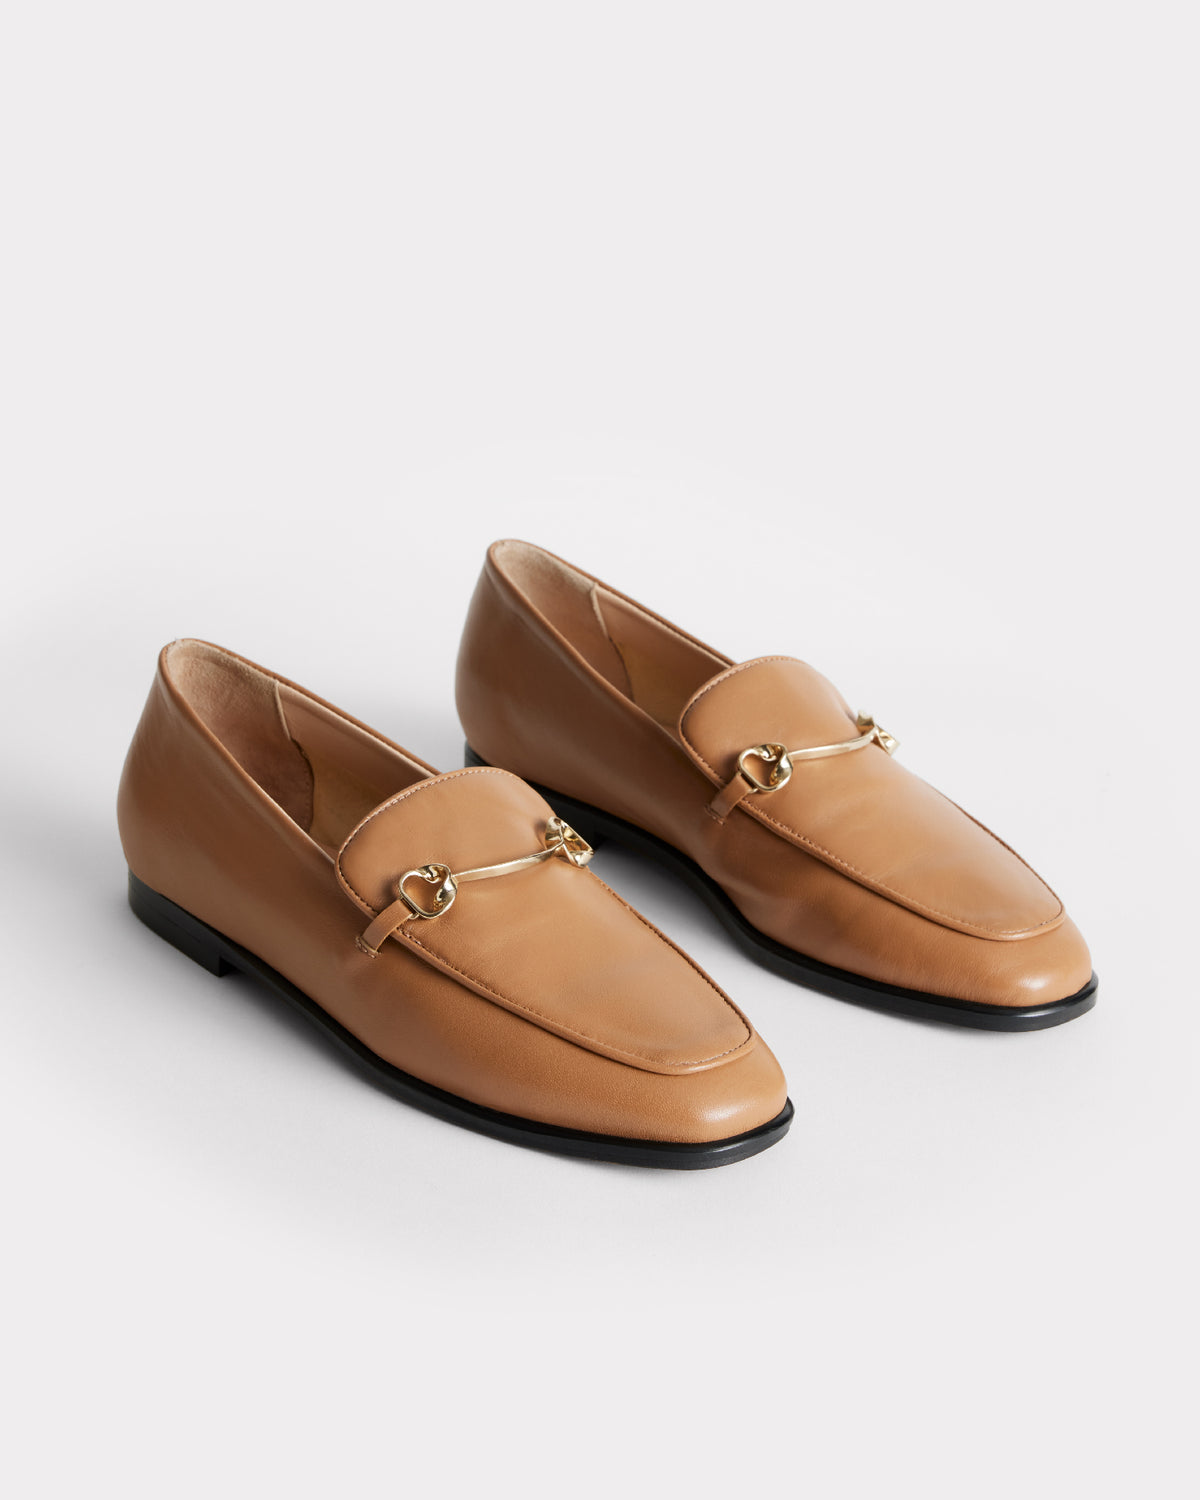 ethically made tan leather loafers